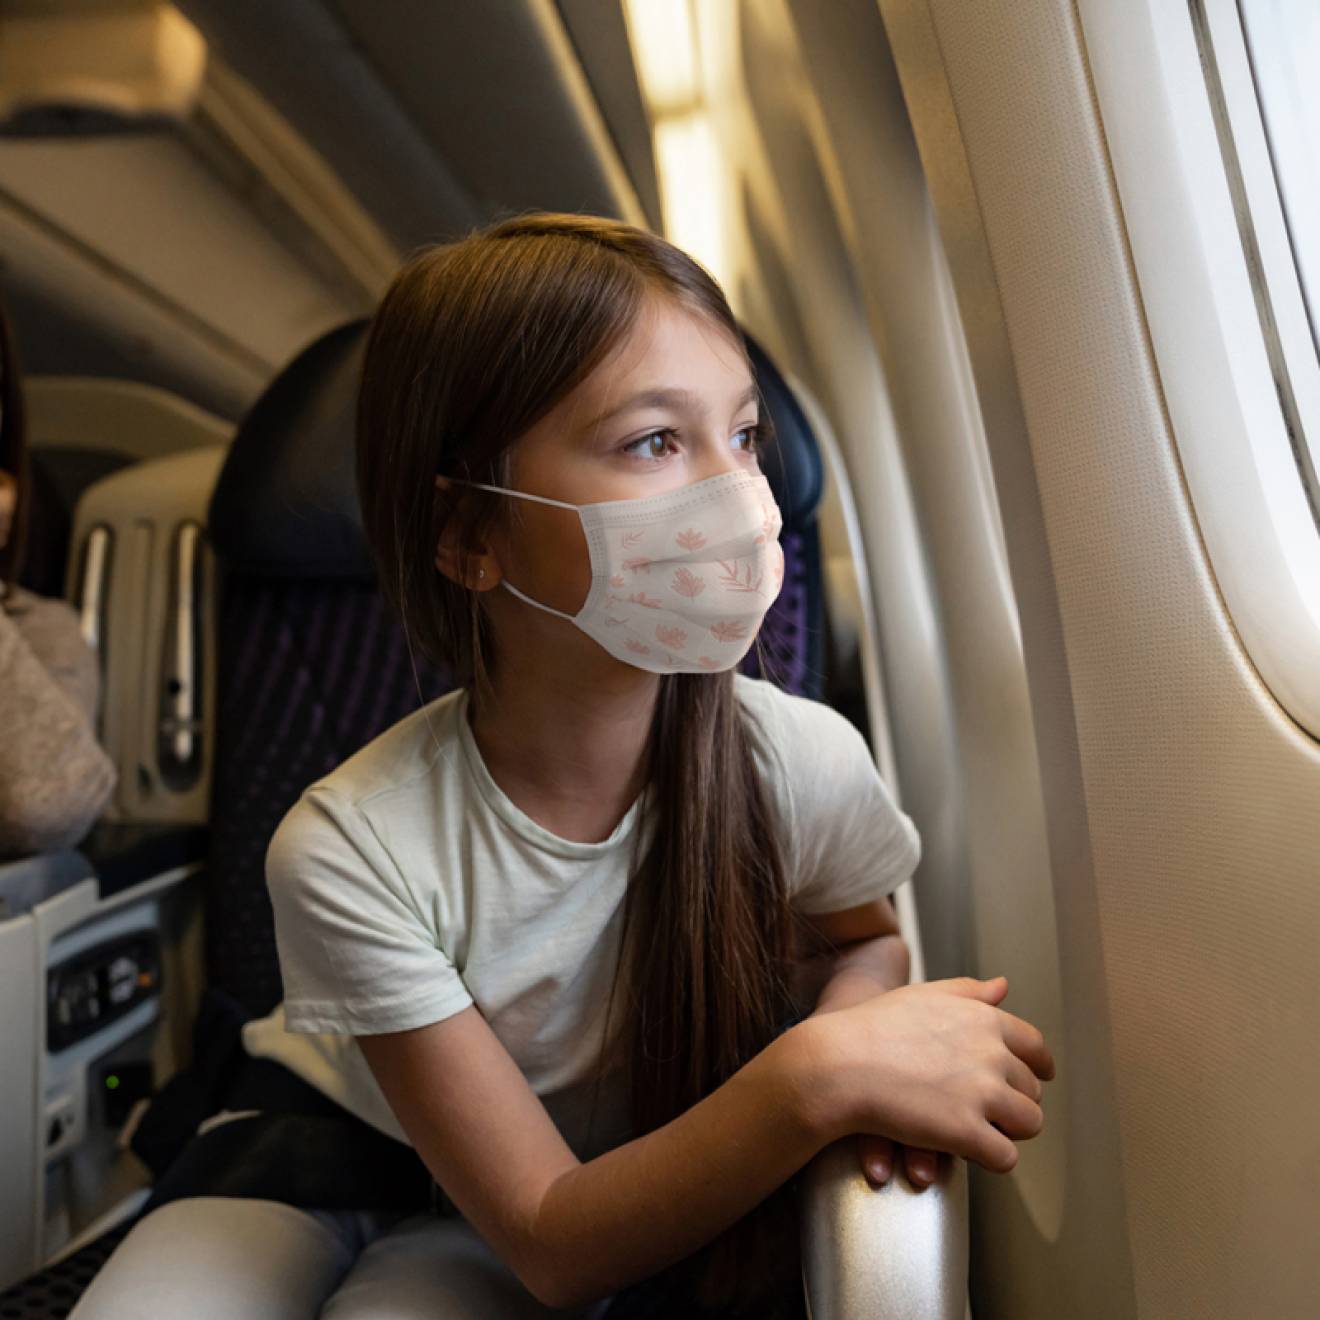 A young girl in a mask stares out an airplane window, mom in background